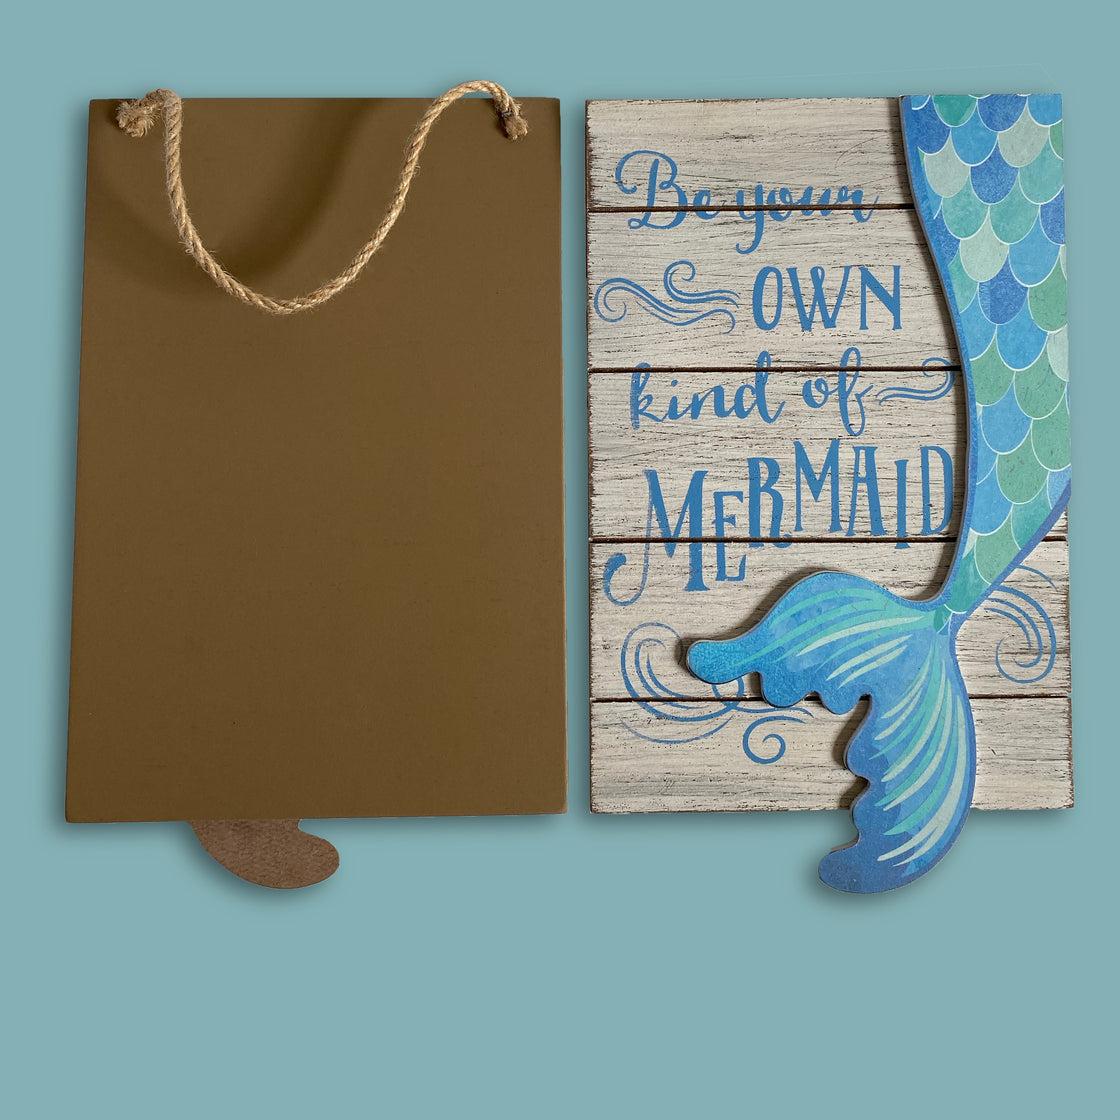 kitchen wall decor - front + back view of mermaid decor wall art "Be Your Own Kind of Mermaid"